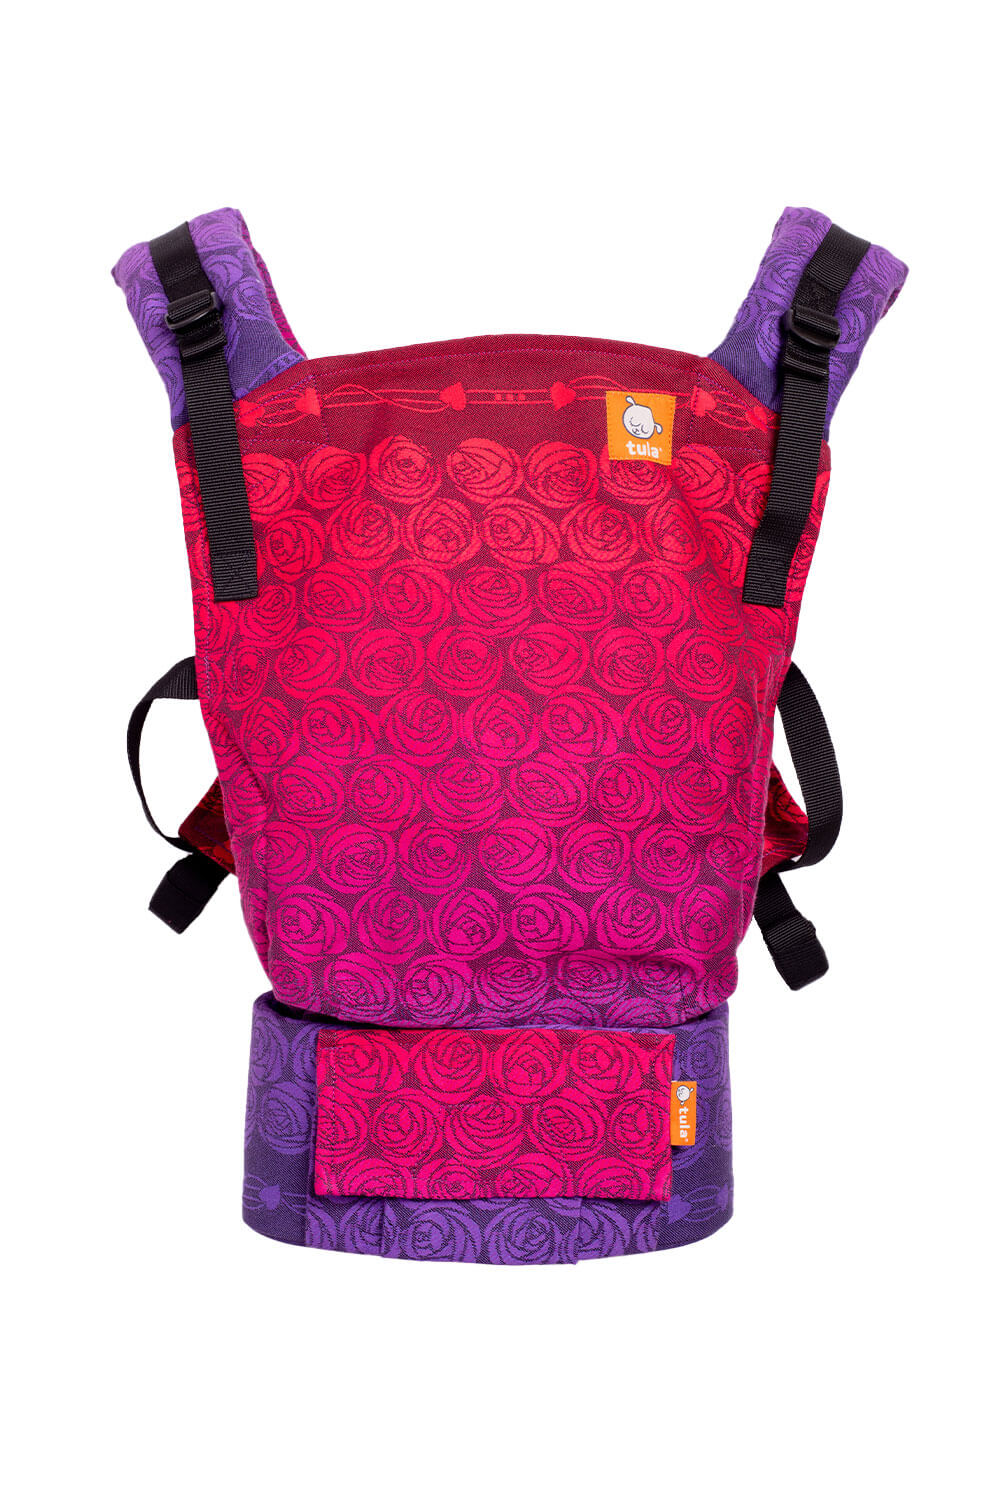 Roses Berry Crush - Signature Woven Free-to-Grow Baby Carrier